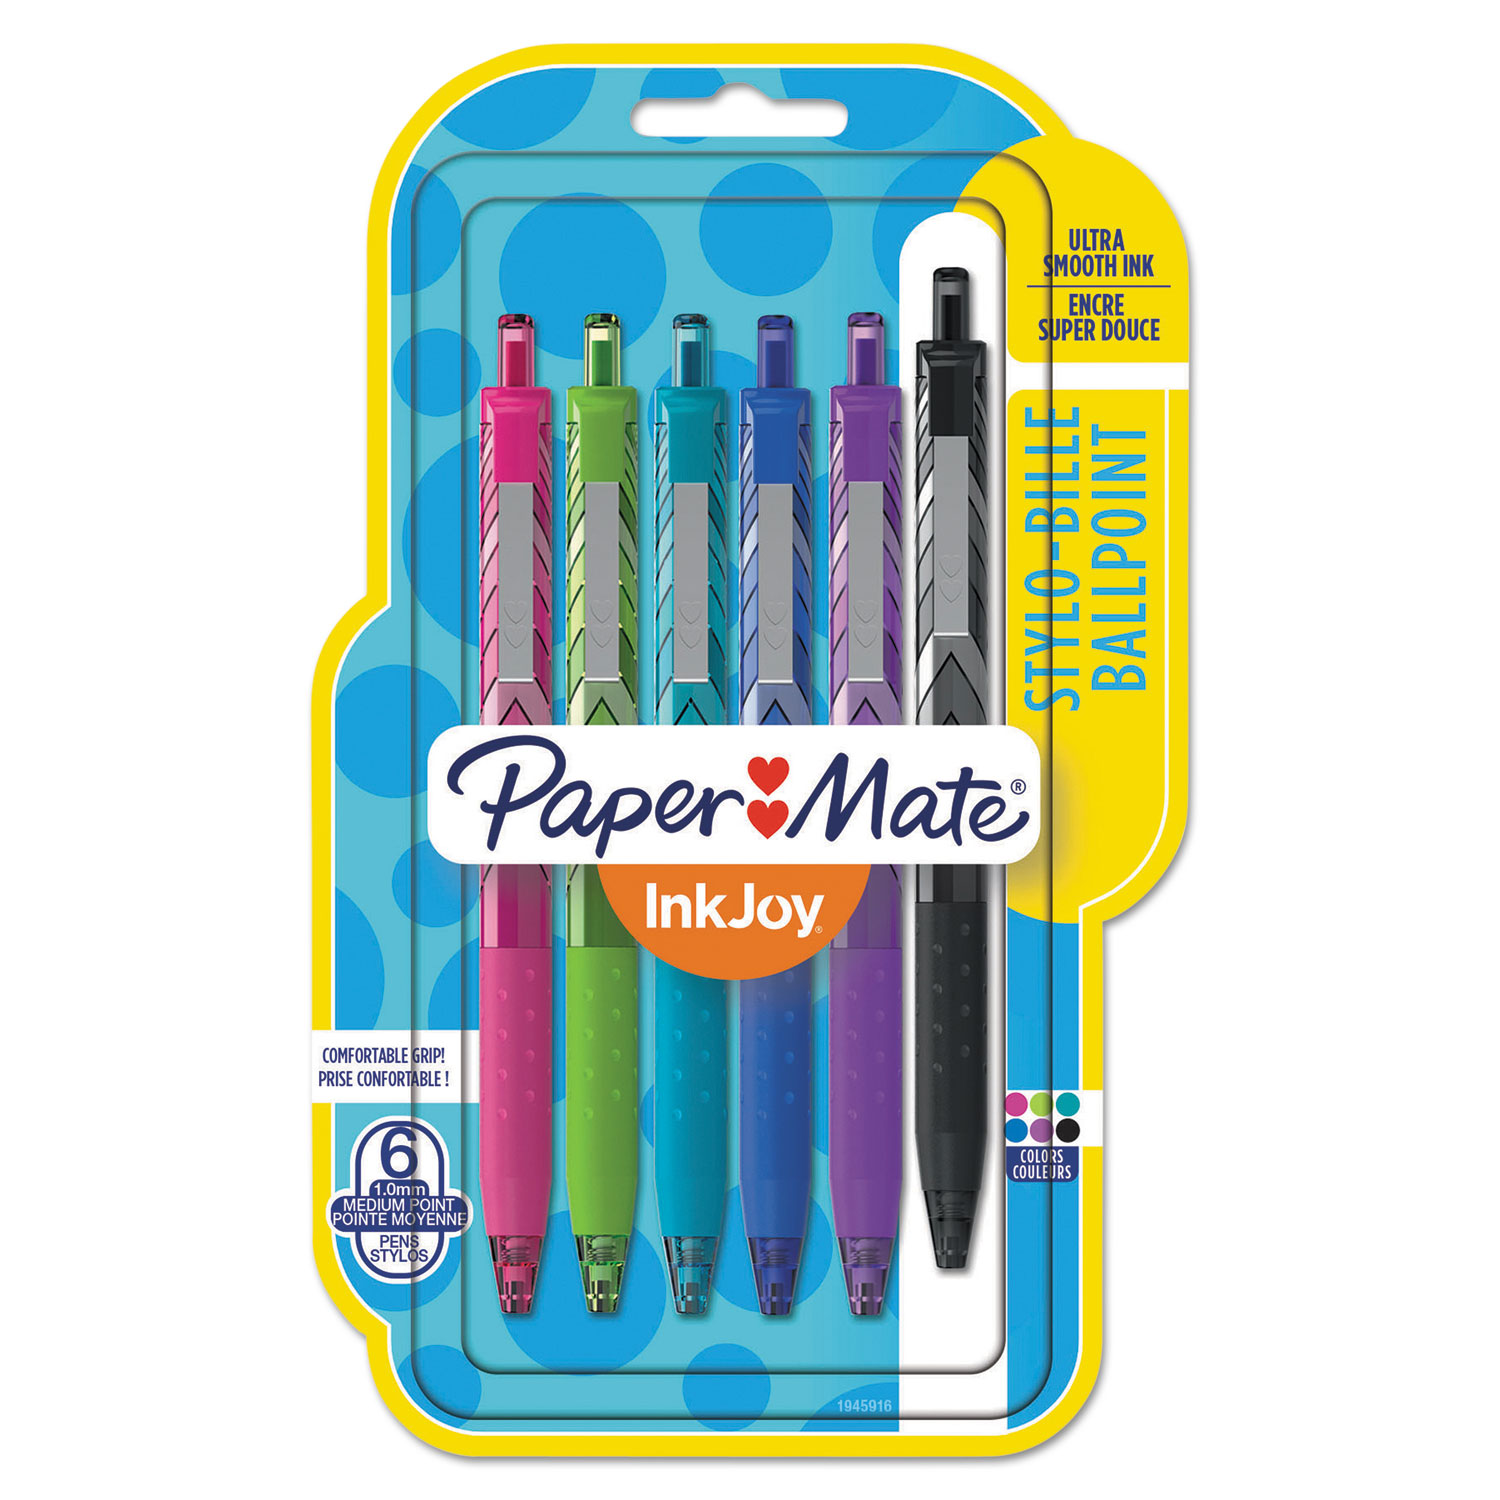  Paper Mate 1945916 InkJoy 300 RT Fashion Wrap Ballpoint Pen, 1mm, Assorted Ink/Barrel, 6/Pack (PAP1945916) 